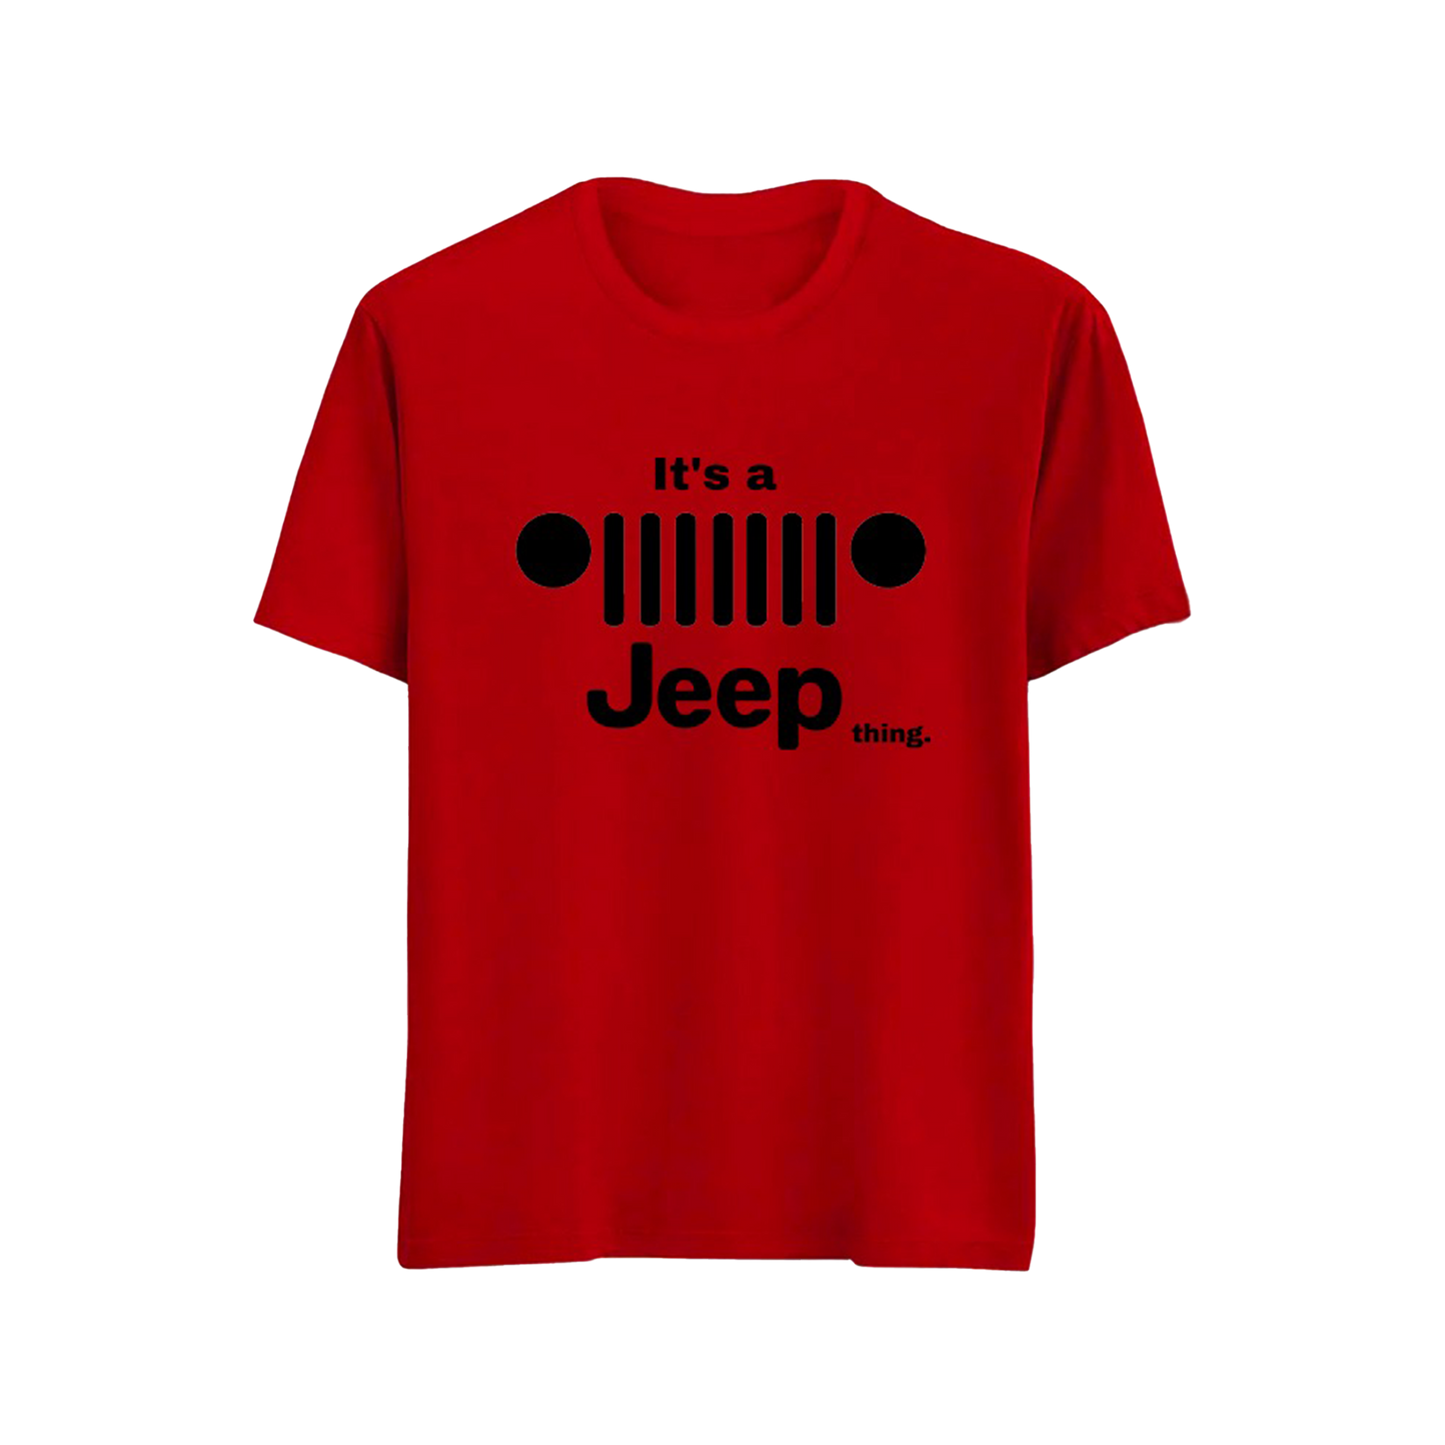 It's a Jeep Thing